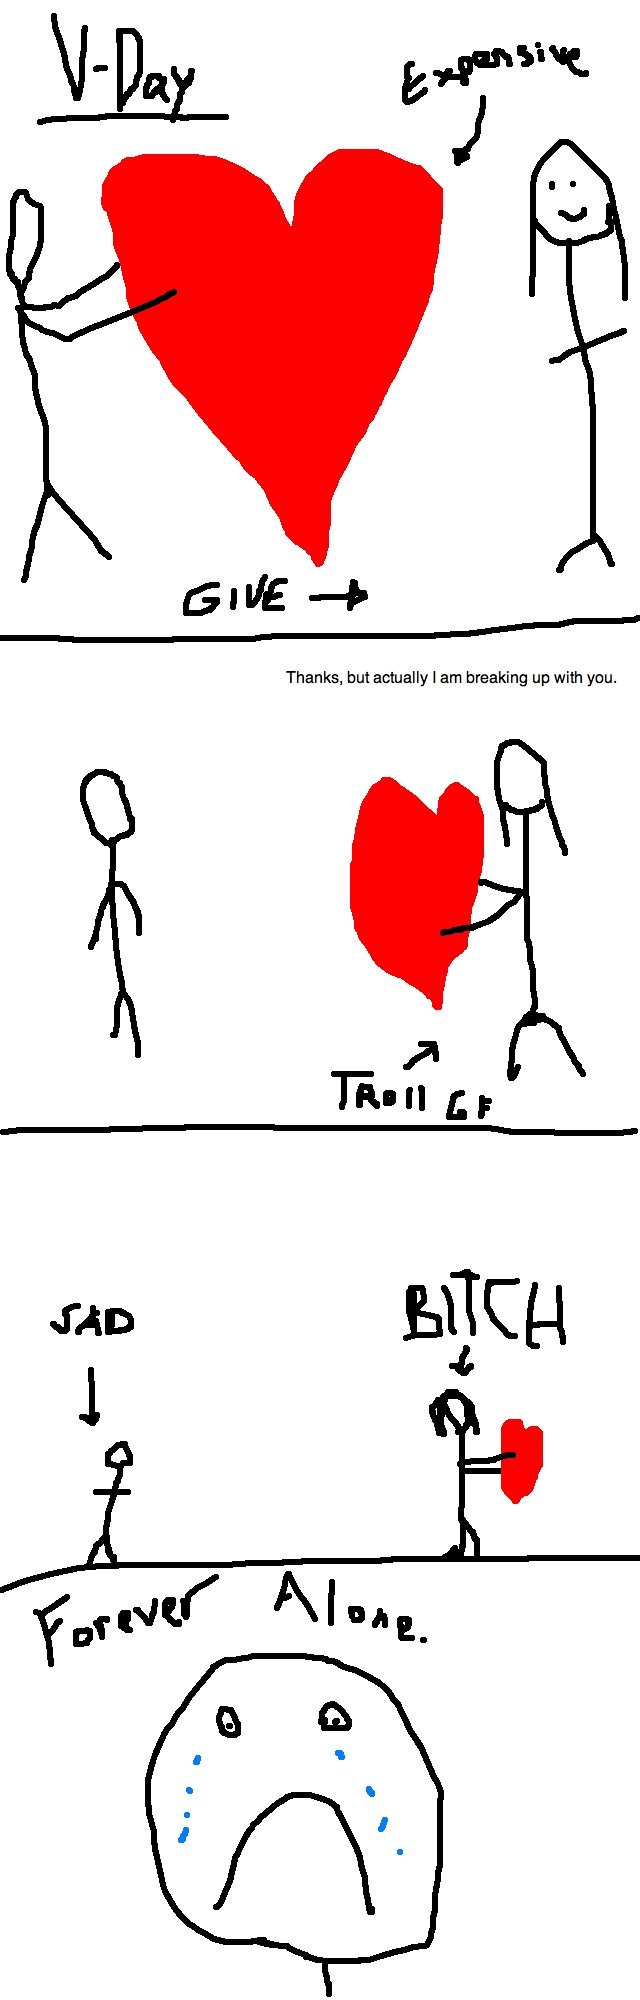 Troll GF. Bitches. Does this happen to any of you on valentines day?&lt;br /&gt; Thumb if you liked, Down thumb if it was . It was probably .&lt;br /&gt; Be hon